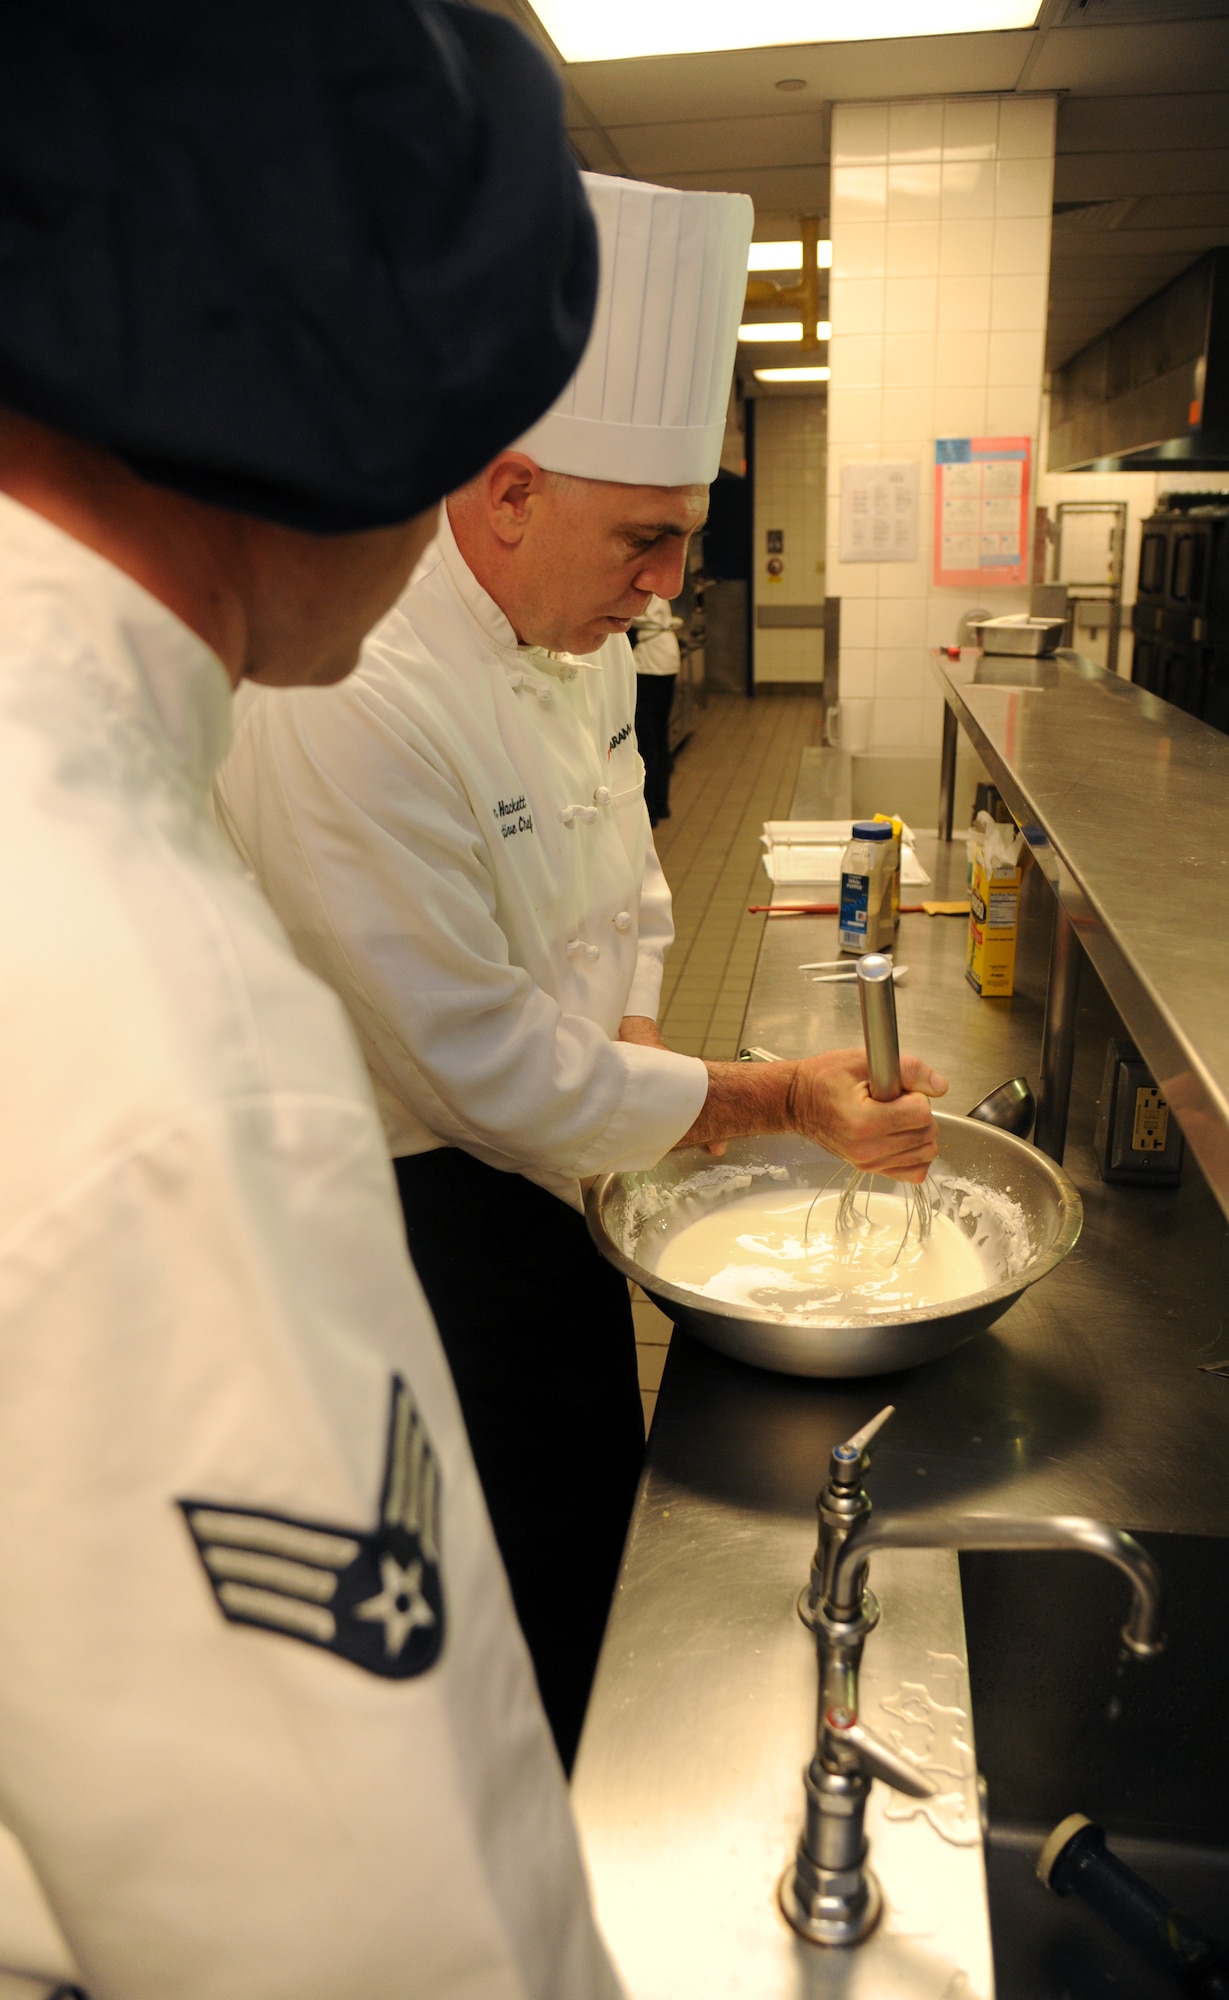 Senior Airman Brady McDede, 6th Force Support Squadron food service technician, observes stirring techniques performed by Executive Chef, John Hackett, at the Citi Bank corporate building in Tampa, Fla., March 23, 2012. McDede was sent by 6th FSS to train with civilan chefs to help improve the dining conditions on MacDill Air Force Base, Fla. (U.S. Air Force photo by Airman Basic David Tracy)